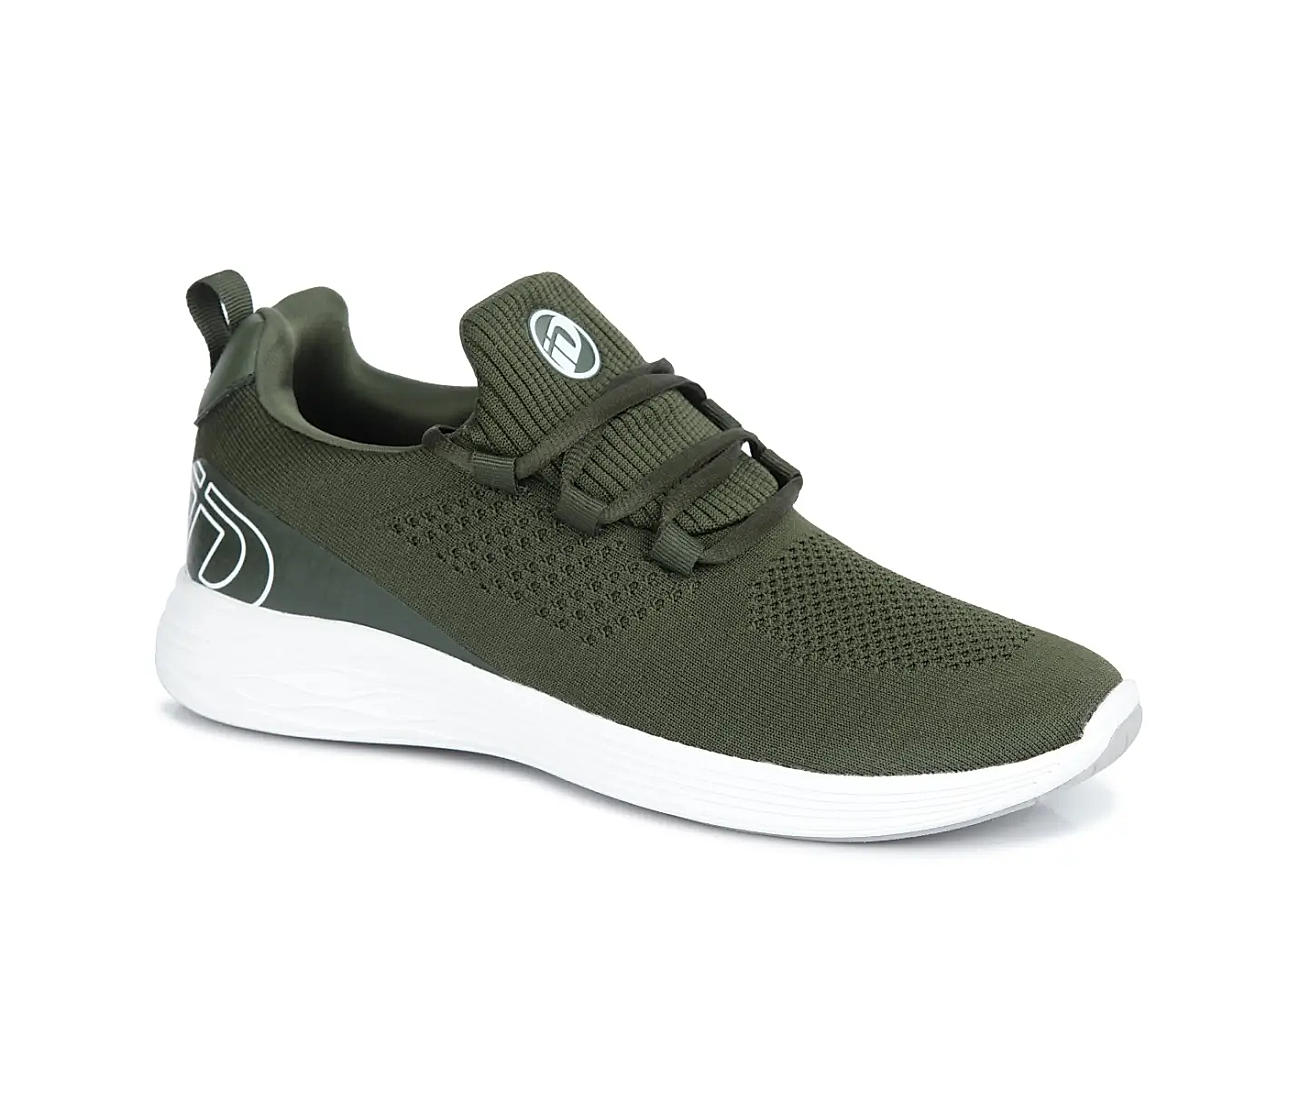 Buy ID Olive Slip-On Running Sports Shoes for Men at Amazon.in